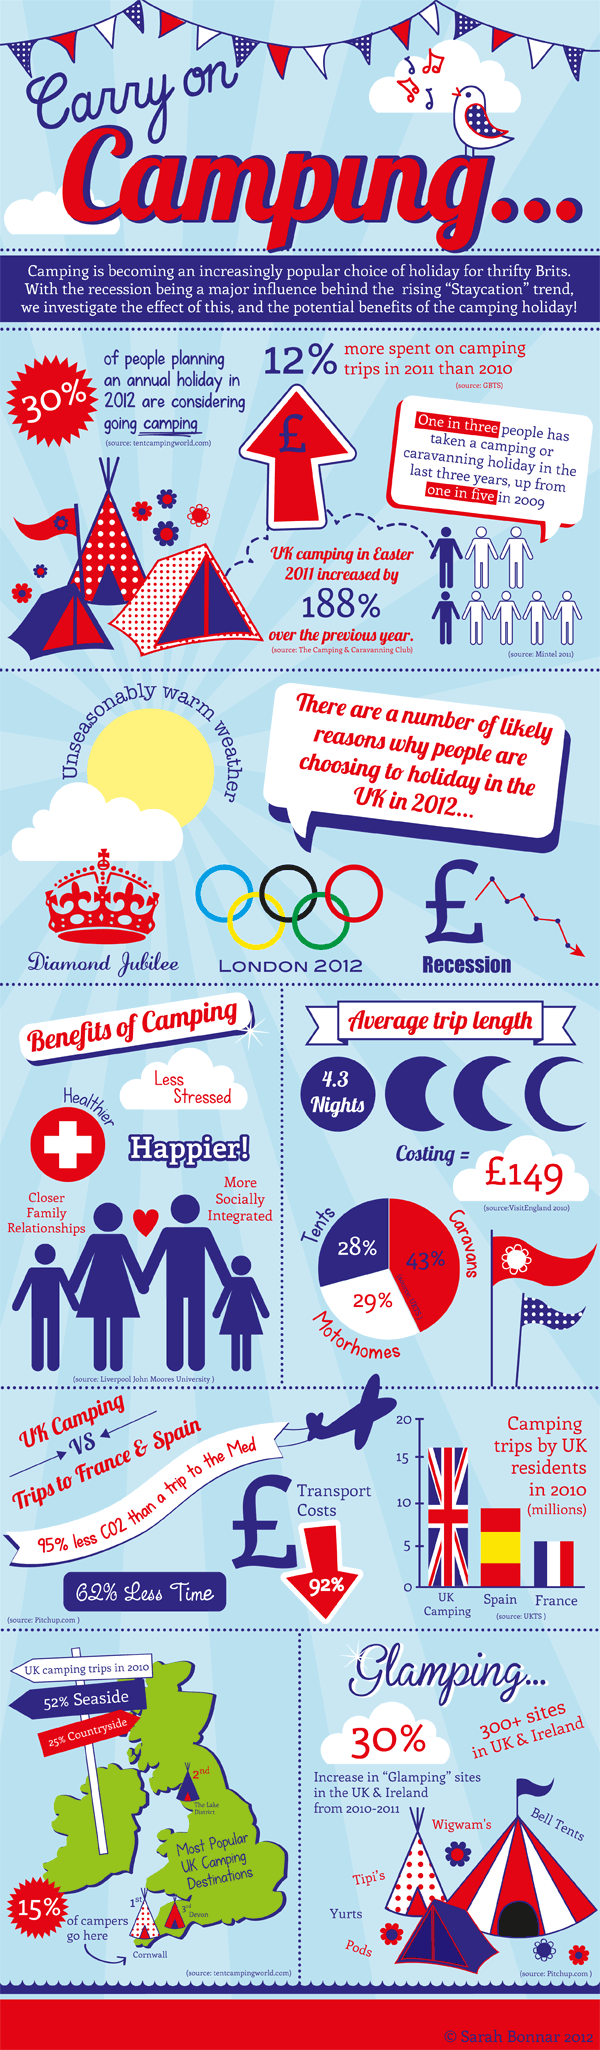 Carry on camping: A UK camping snapshot Infographic